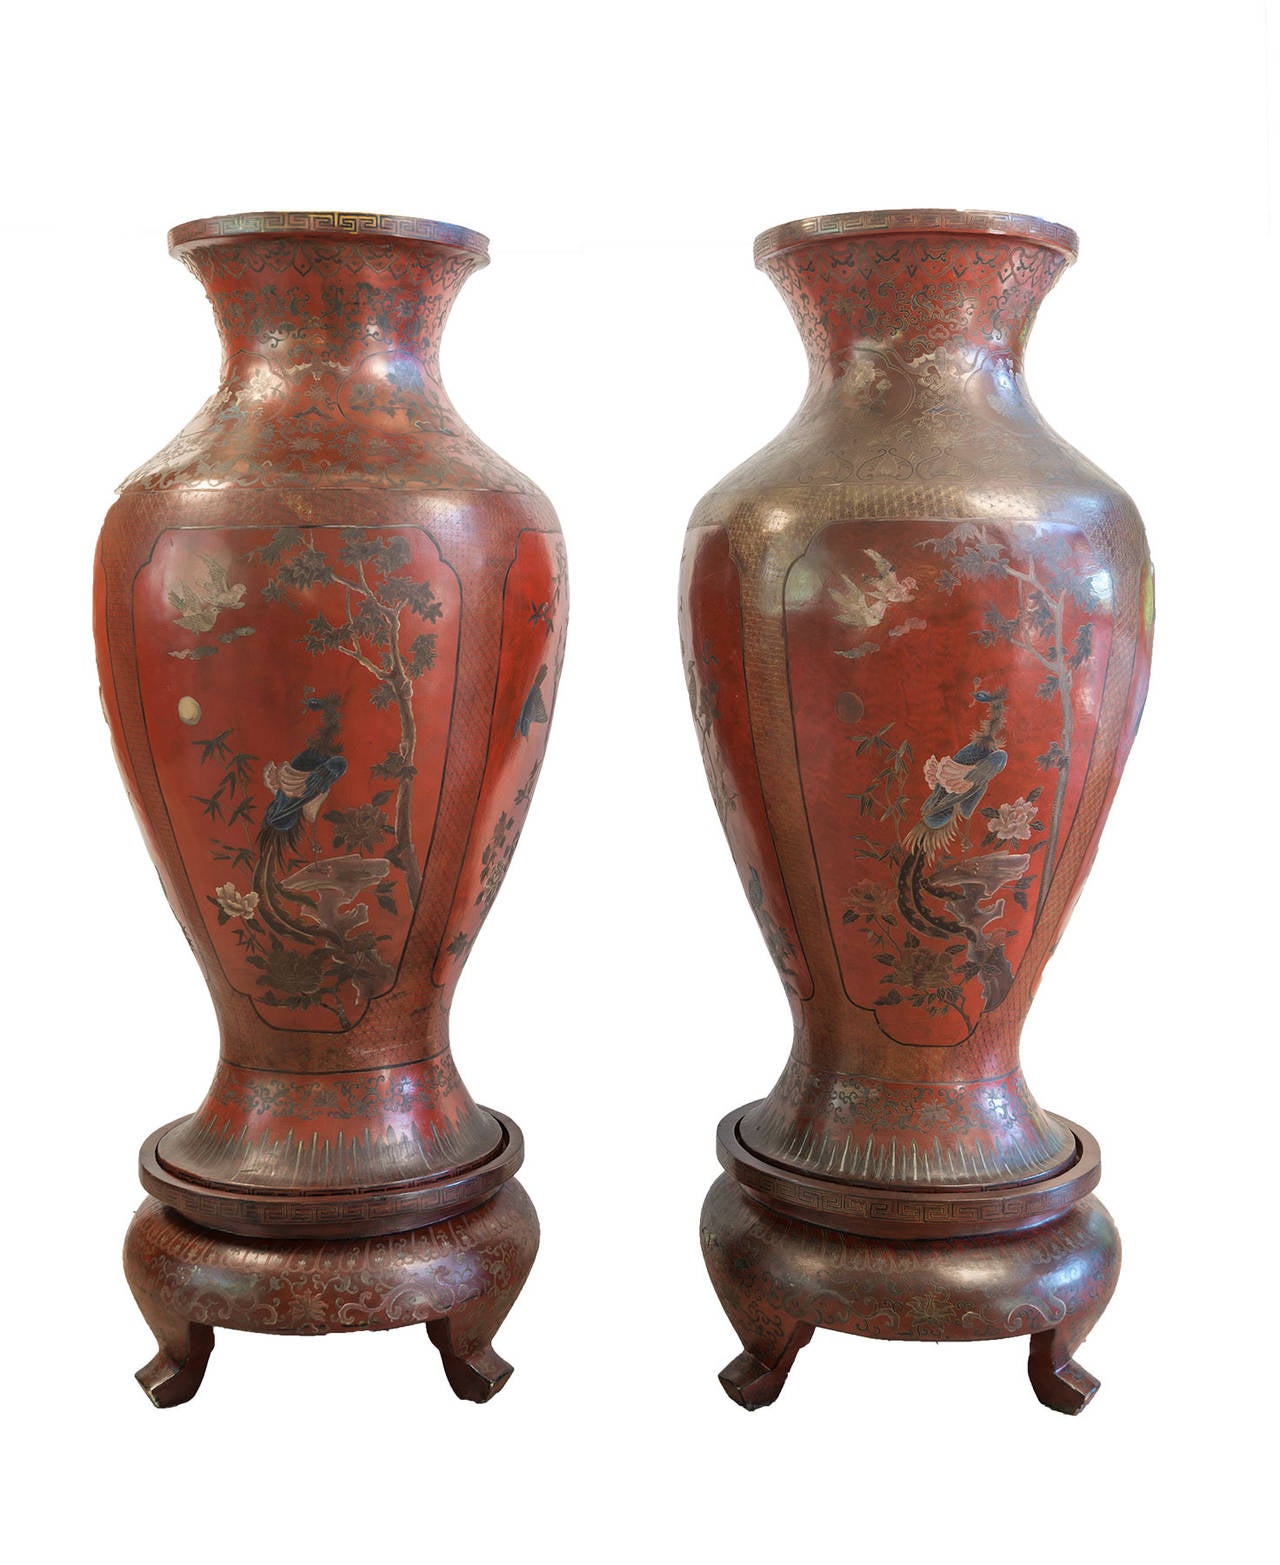 Pair of Red Lacquer Chinese Vases, 19th Century For Sale 3